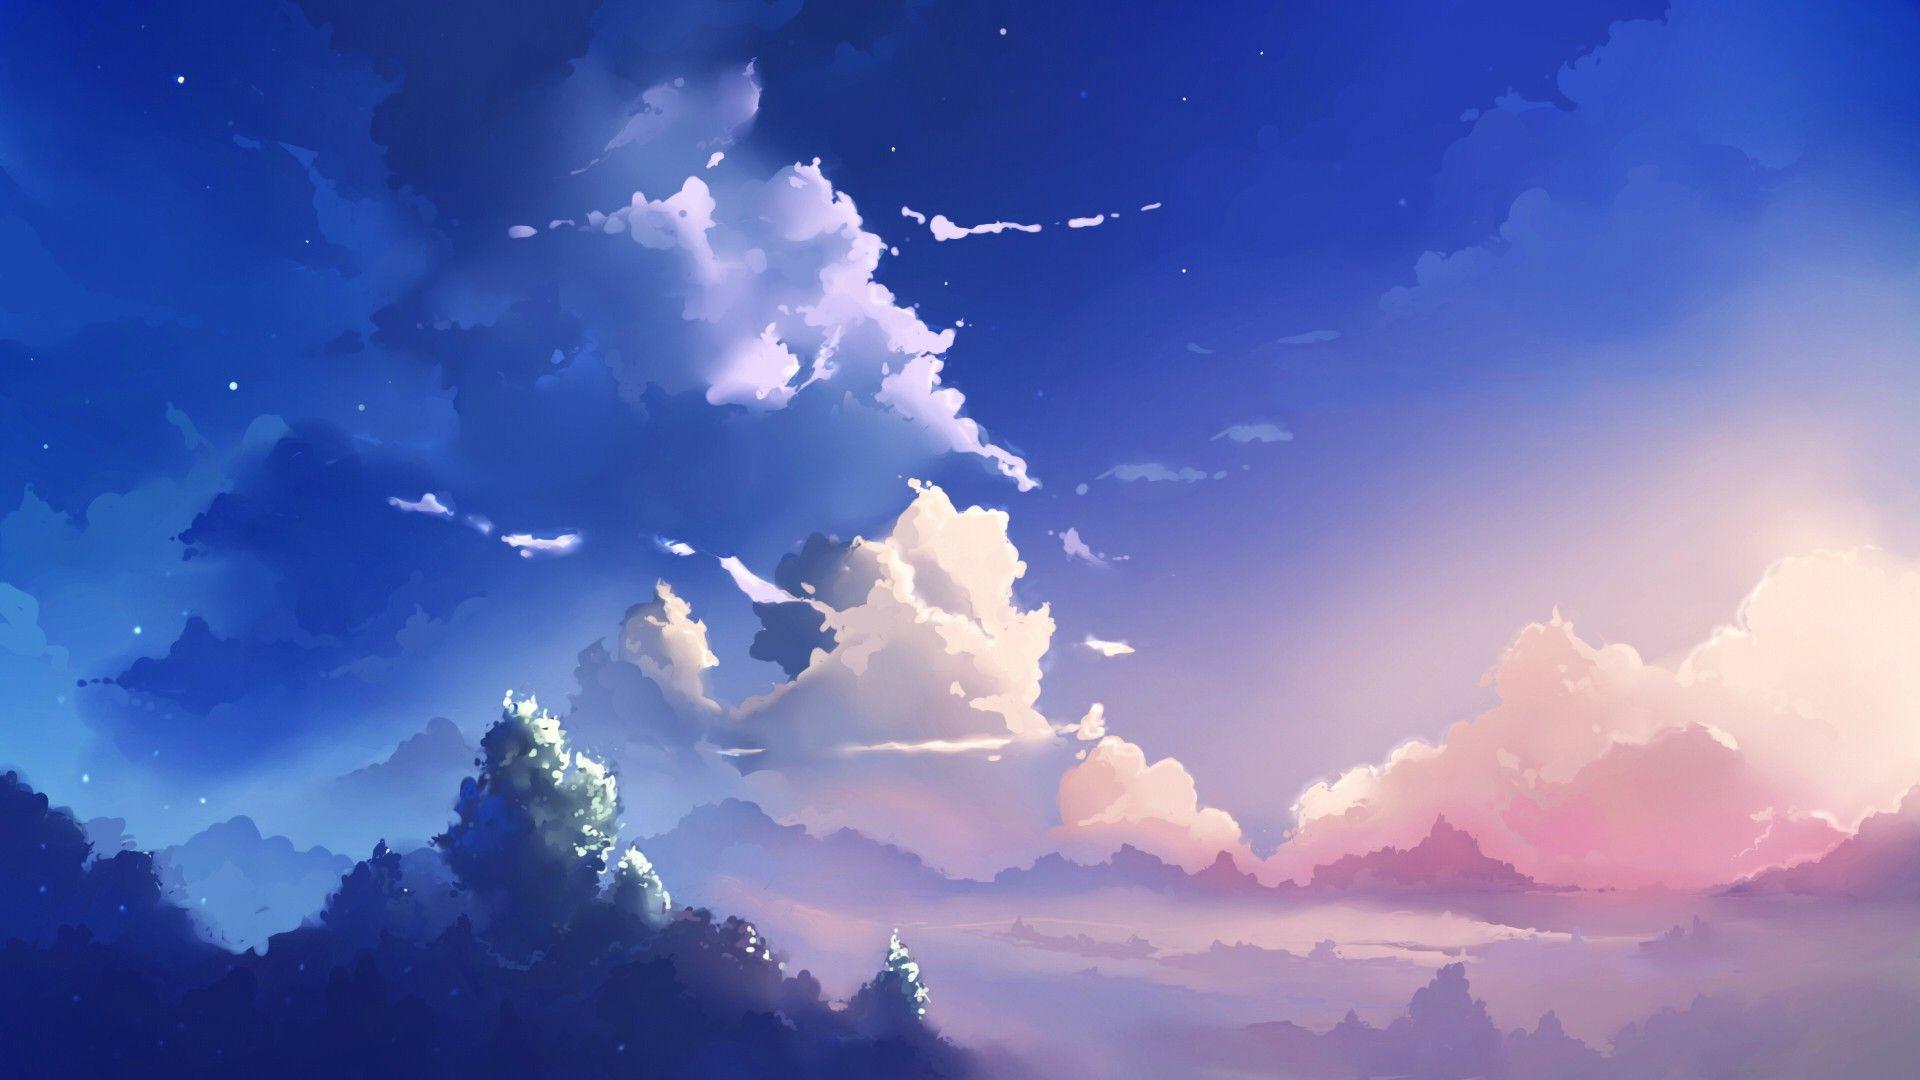 Anime Sky Images  90 Images backgrounds